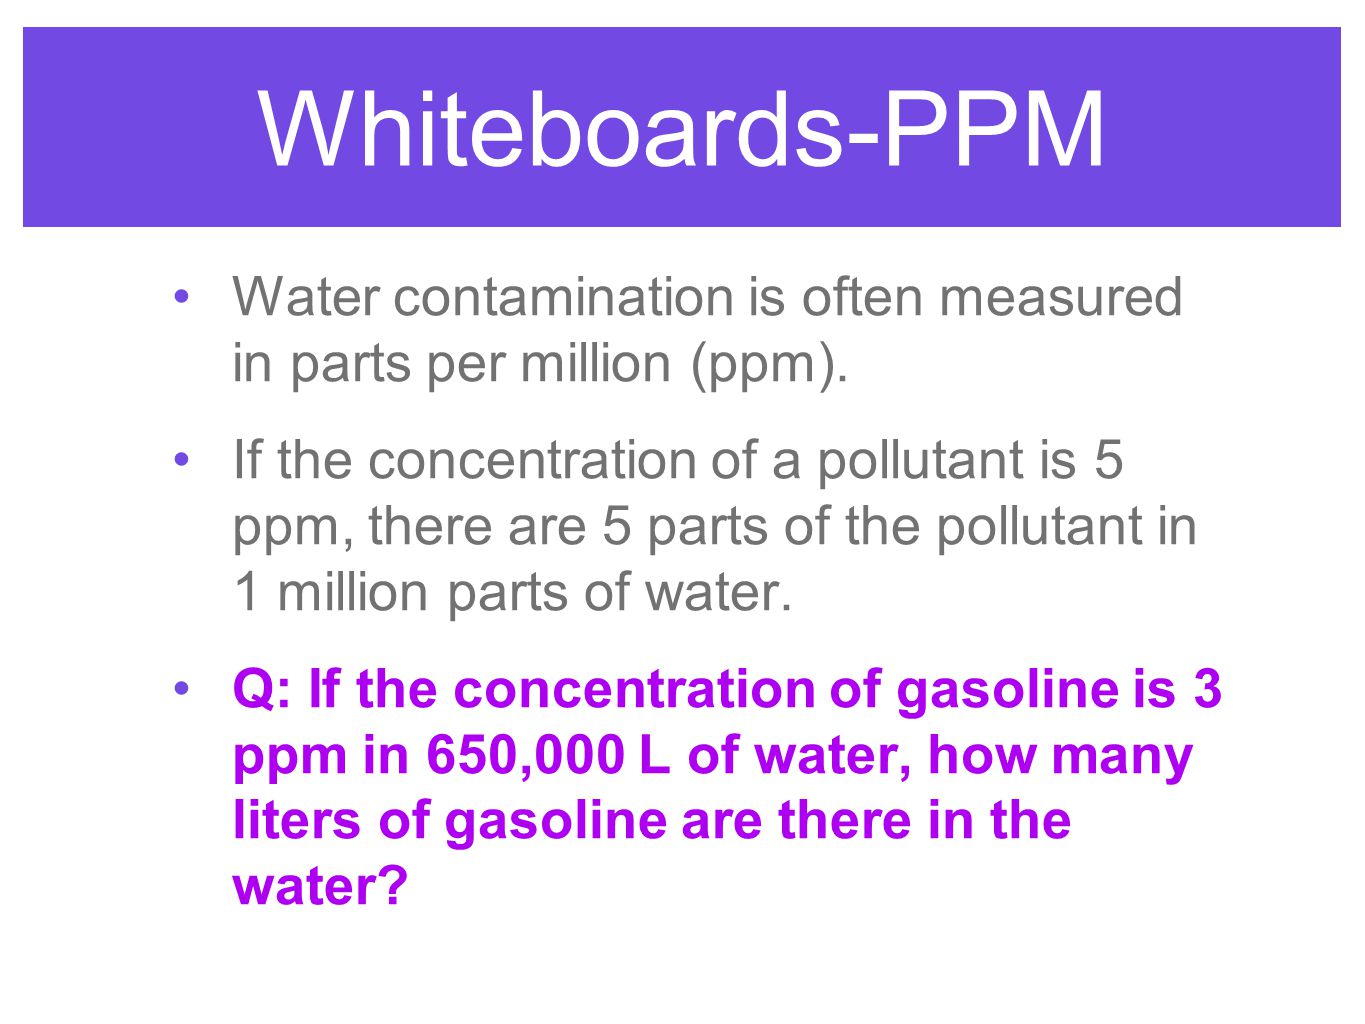 Whiteboards-PPM Water contamination is often measured in parts per million (ppm).